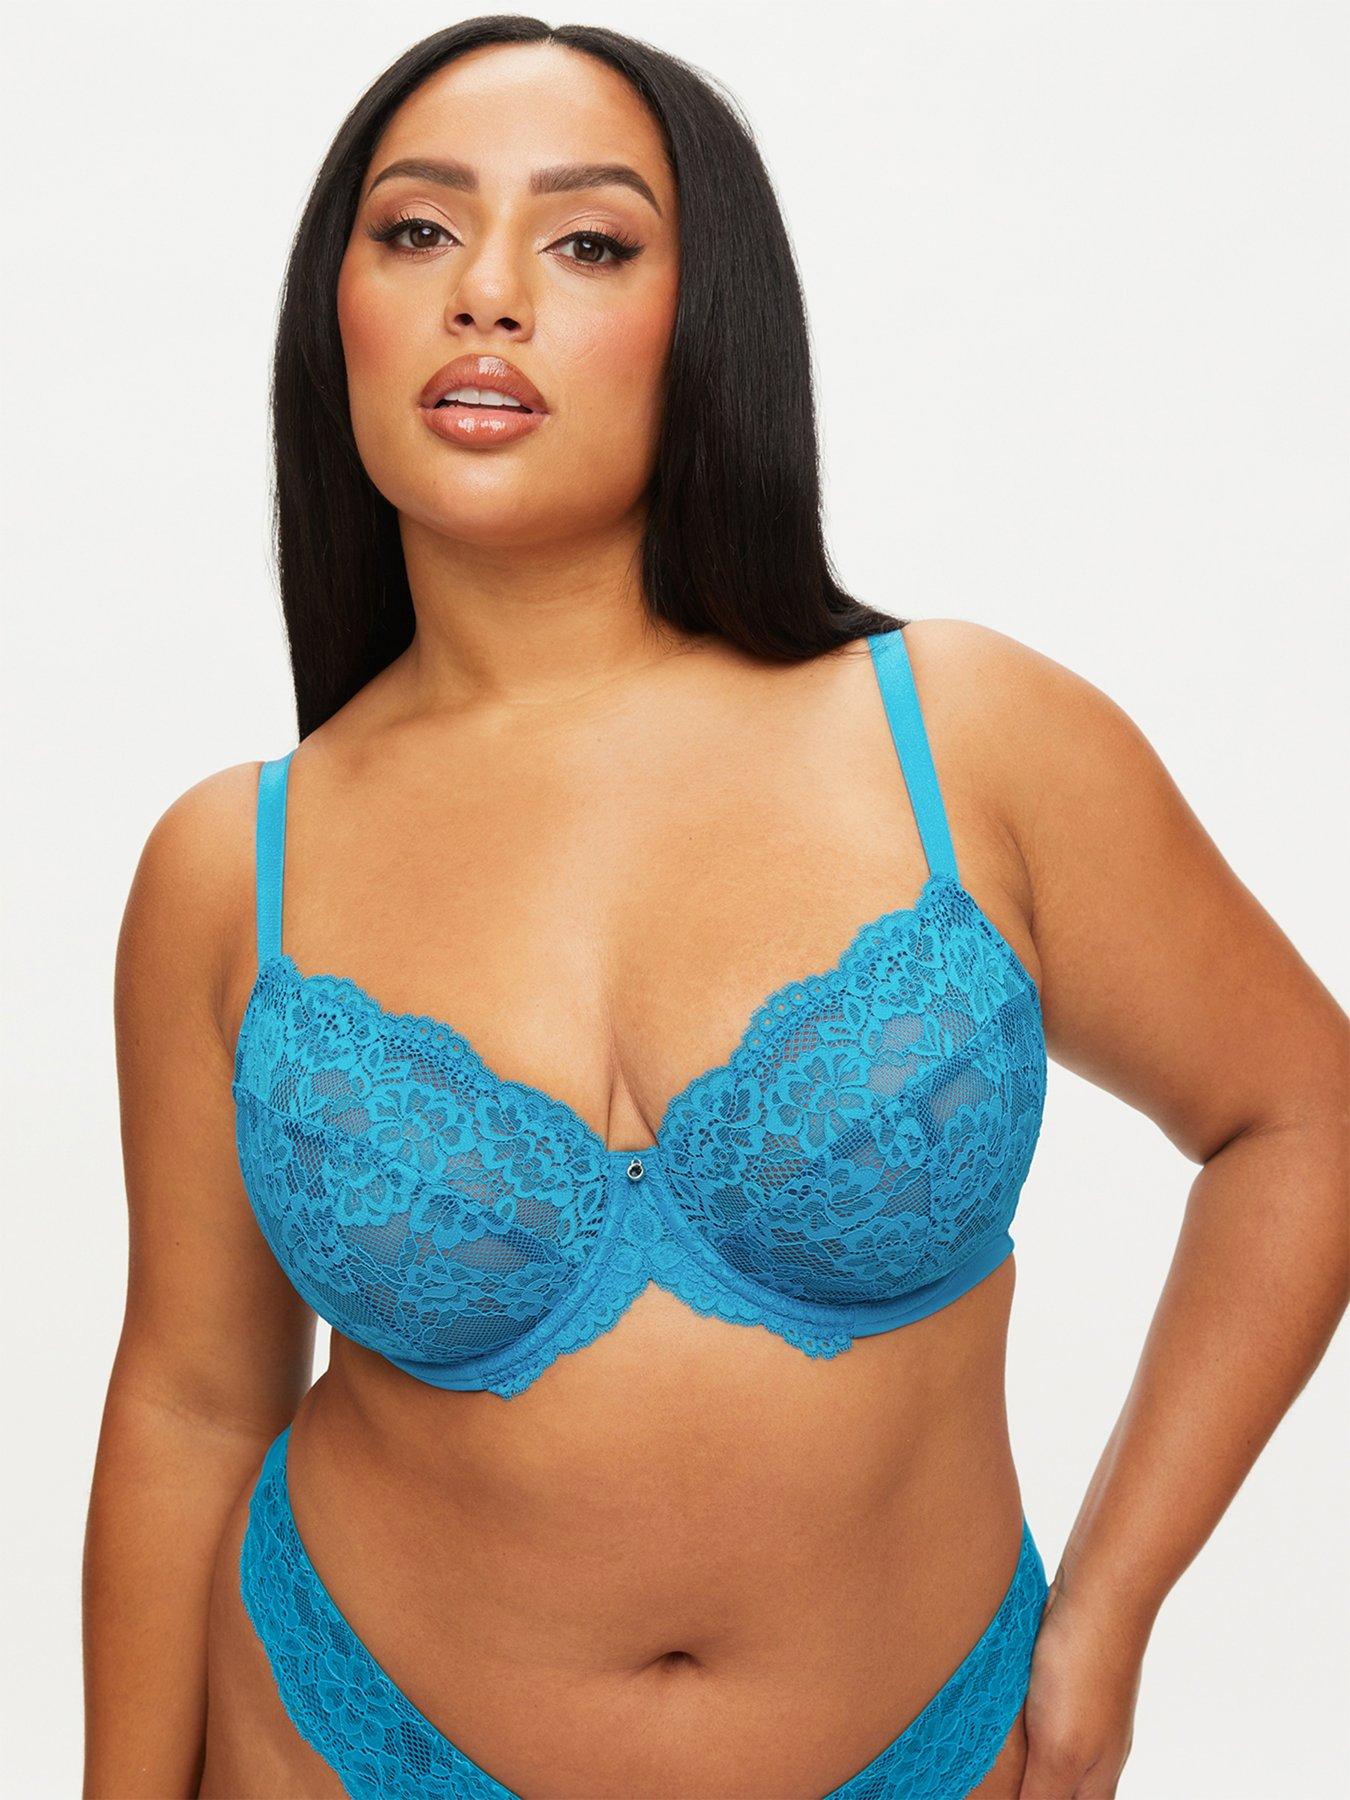 Plus Size 38J Turquoise Sequin Bra with Beaded Floral Design